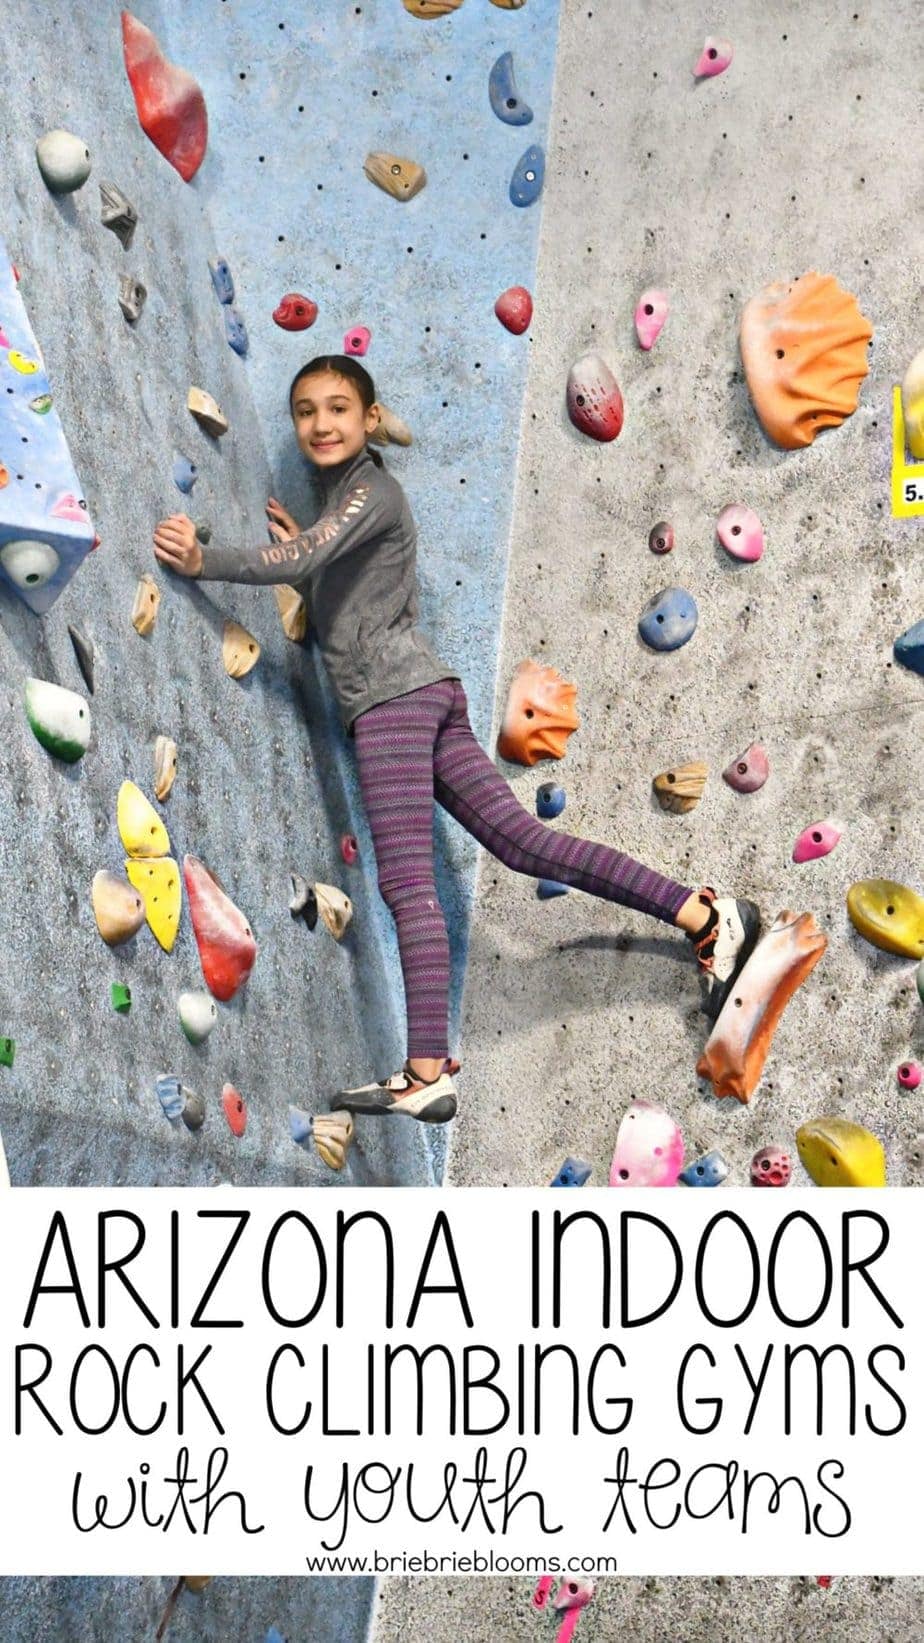 Check out these Arizona indoor rock climbing gyms and plan a visit for a new experience with your family.